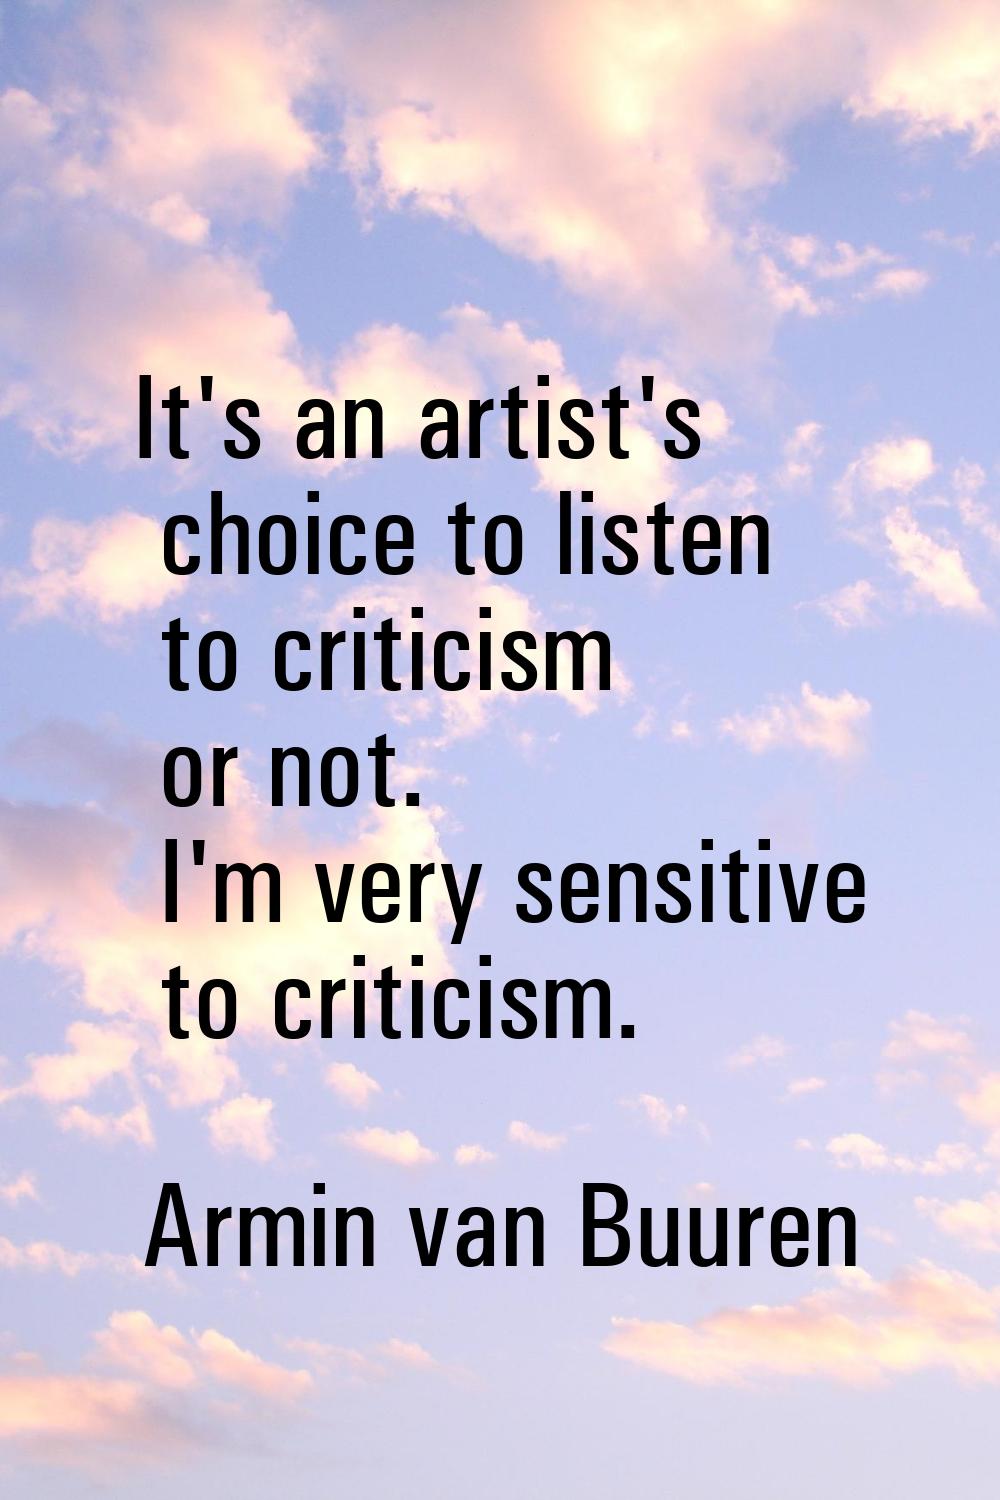 It's an artist's choice to listen to criticism or not. I'm very sensitive to criticism.